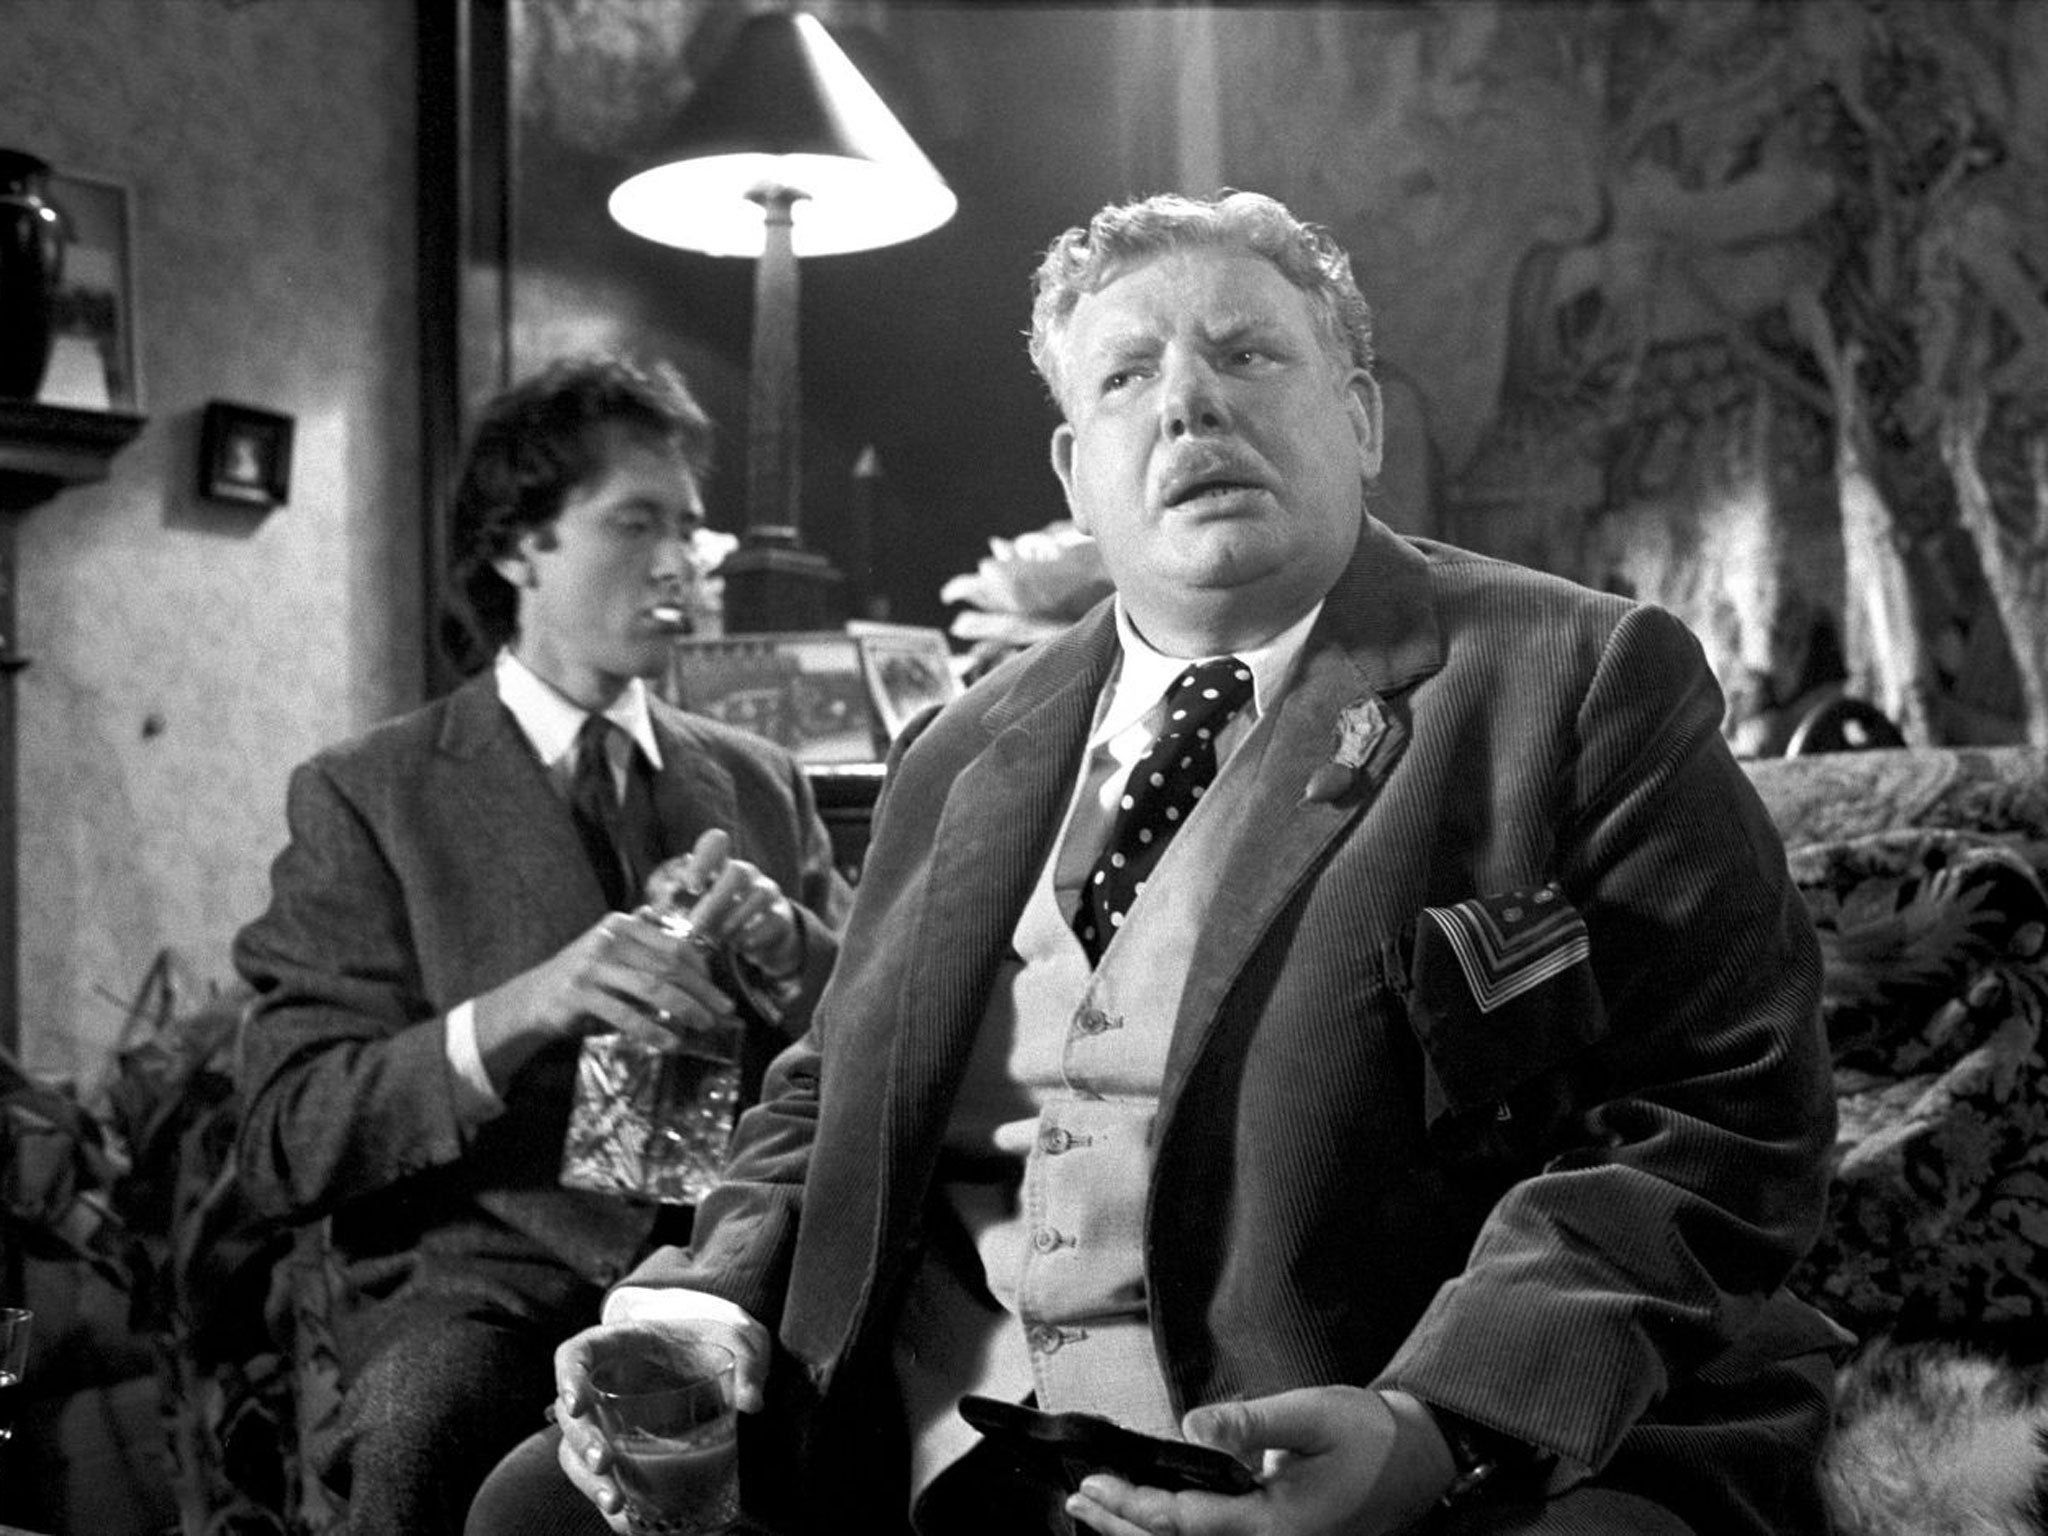 Richard Griffiths in Withnail and I alongside Richard E Grant (1987)